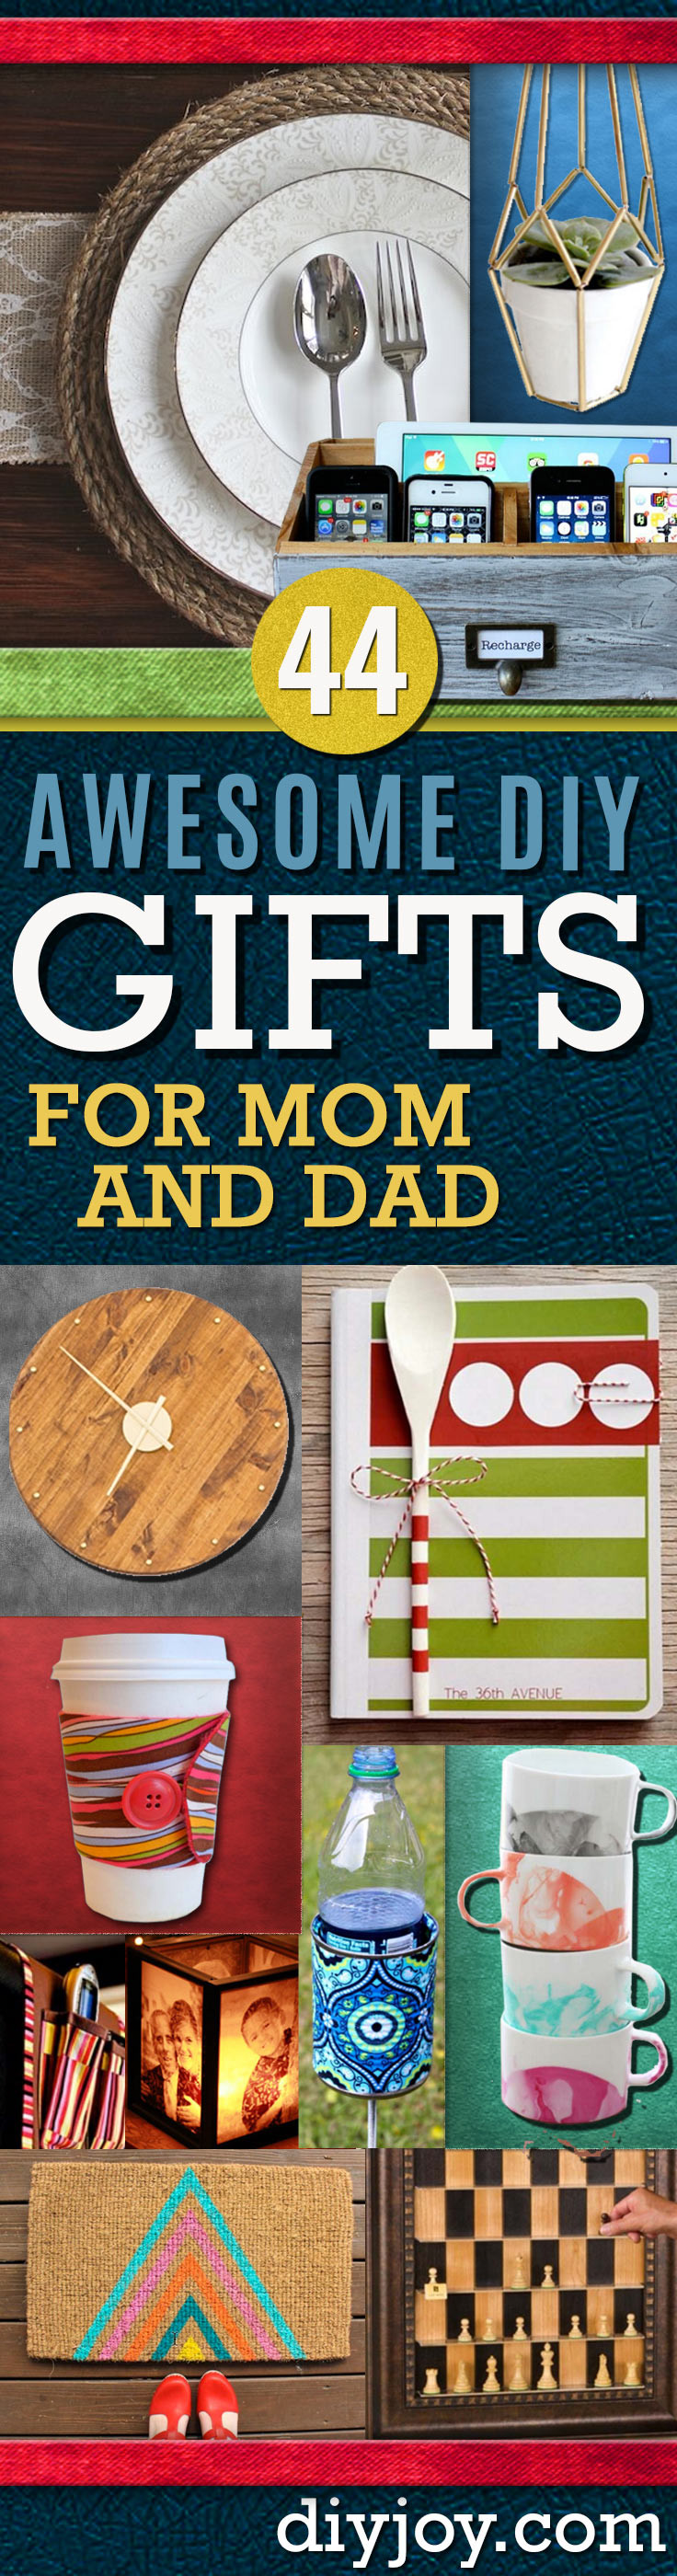 Ideas For Christmas Gift For Mom
 Awesome DIY Gift Ideas Mom and Dad Will Love